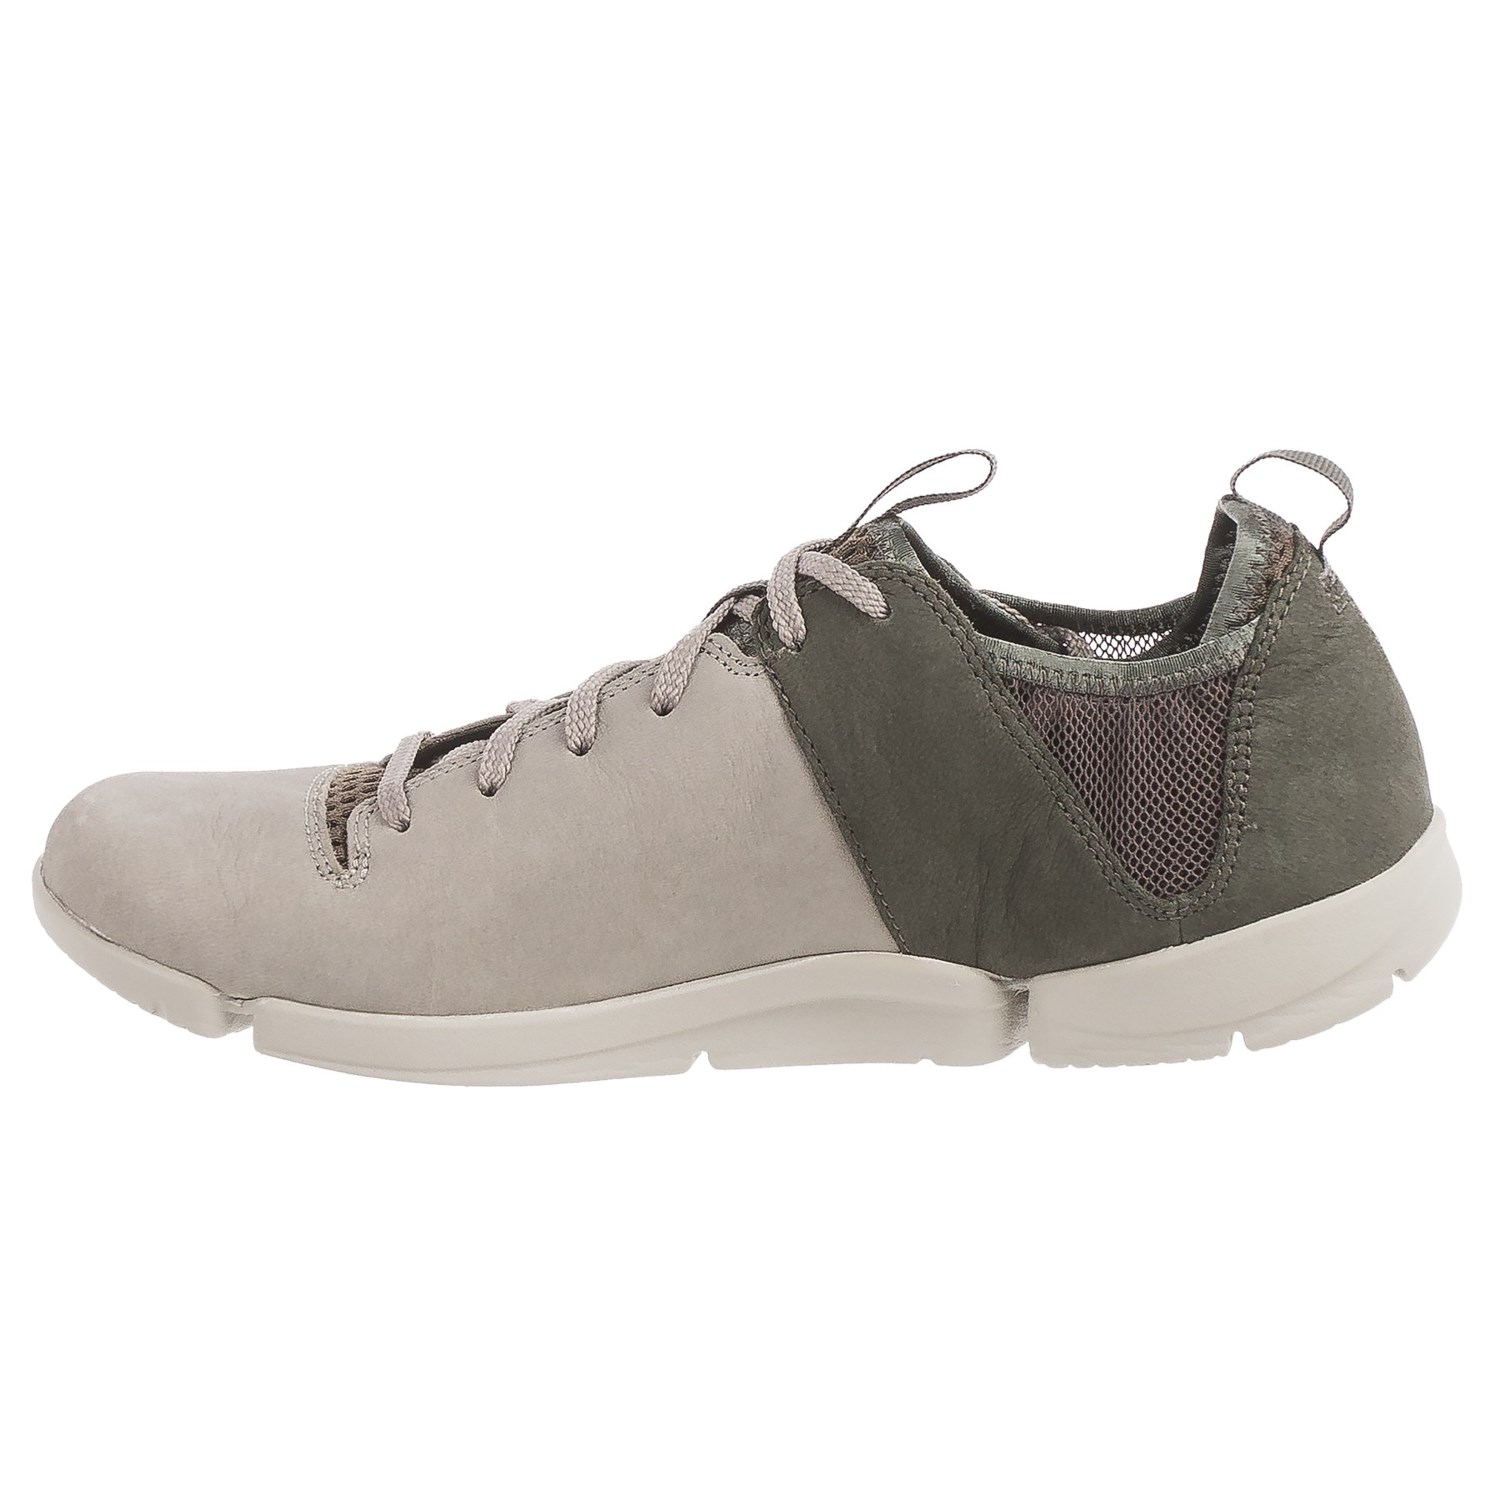 Clarks Tri Active Sneakers (For Women) - Save 75%